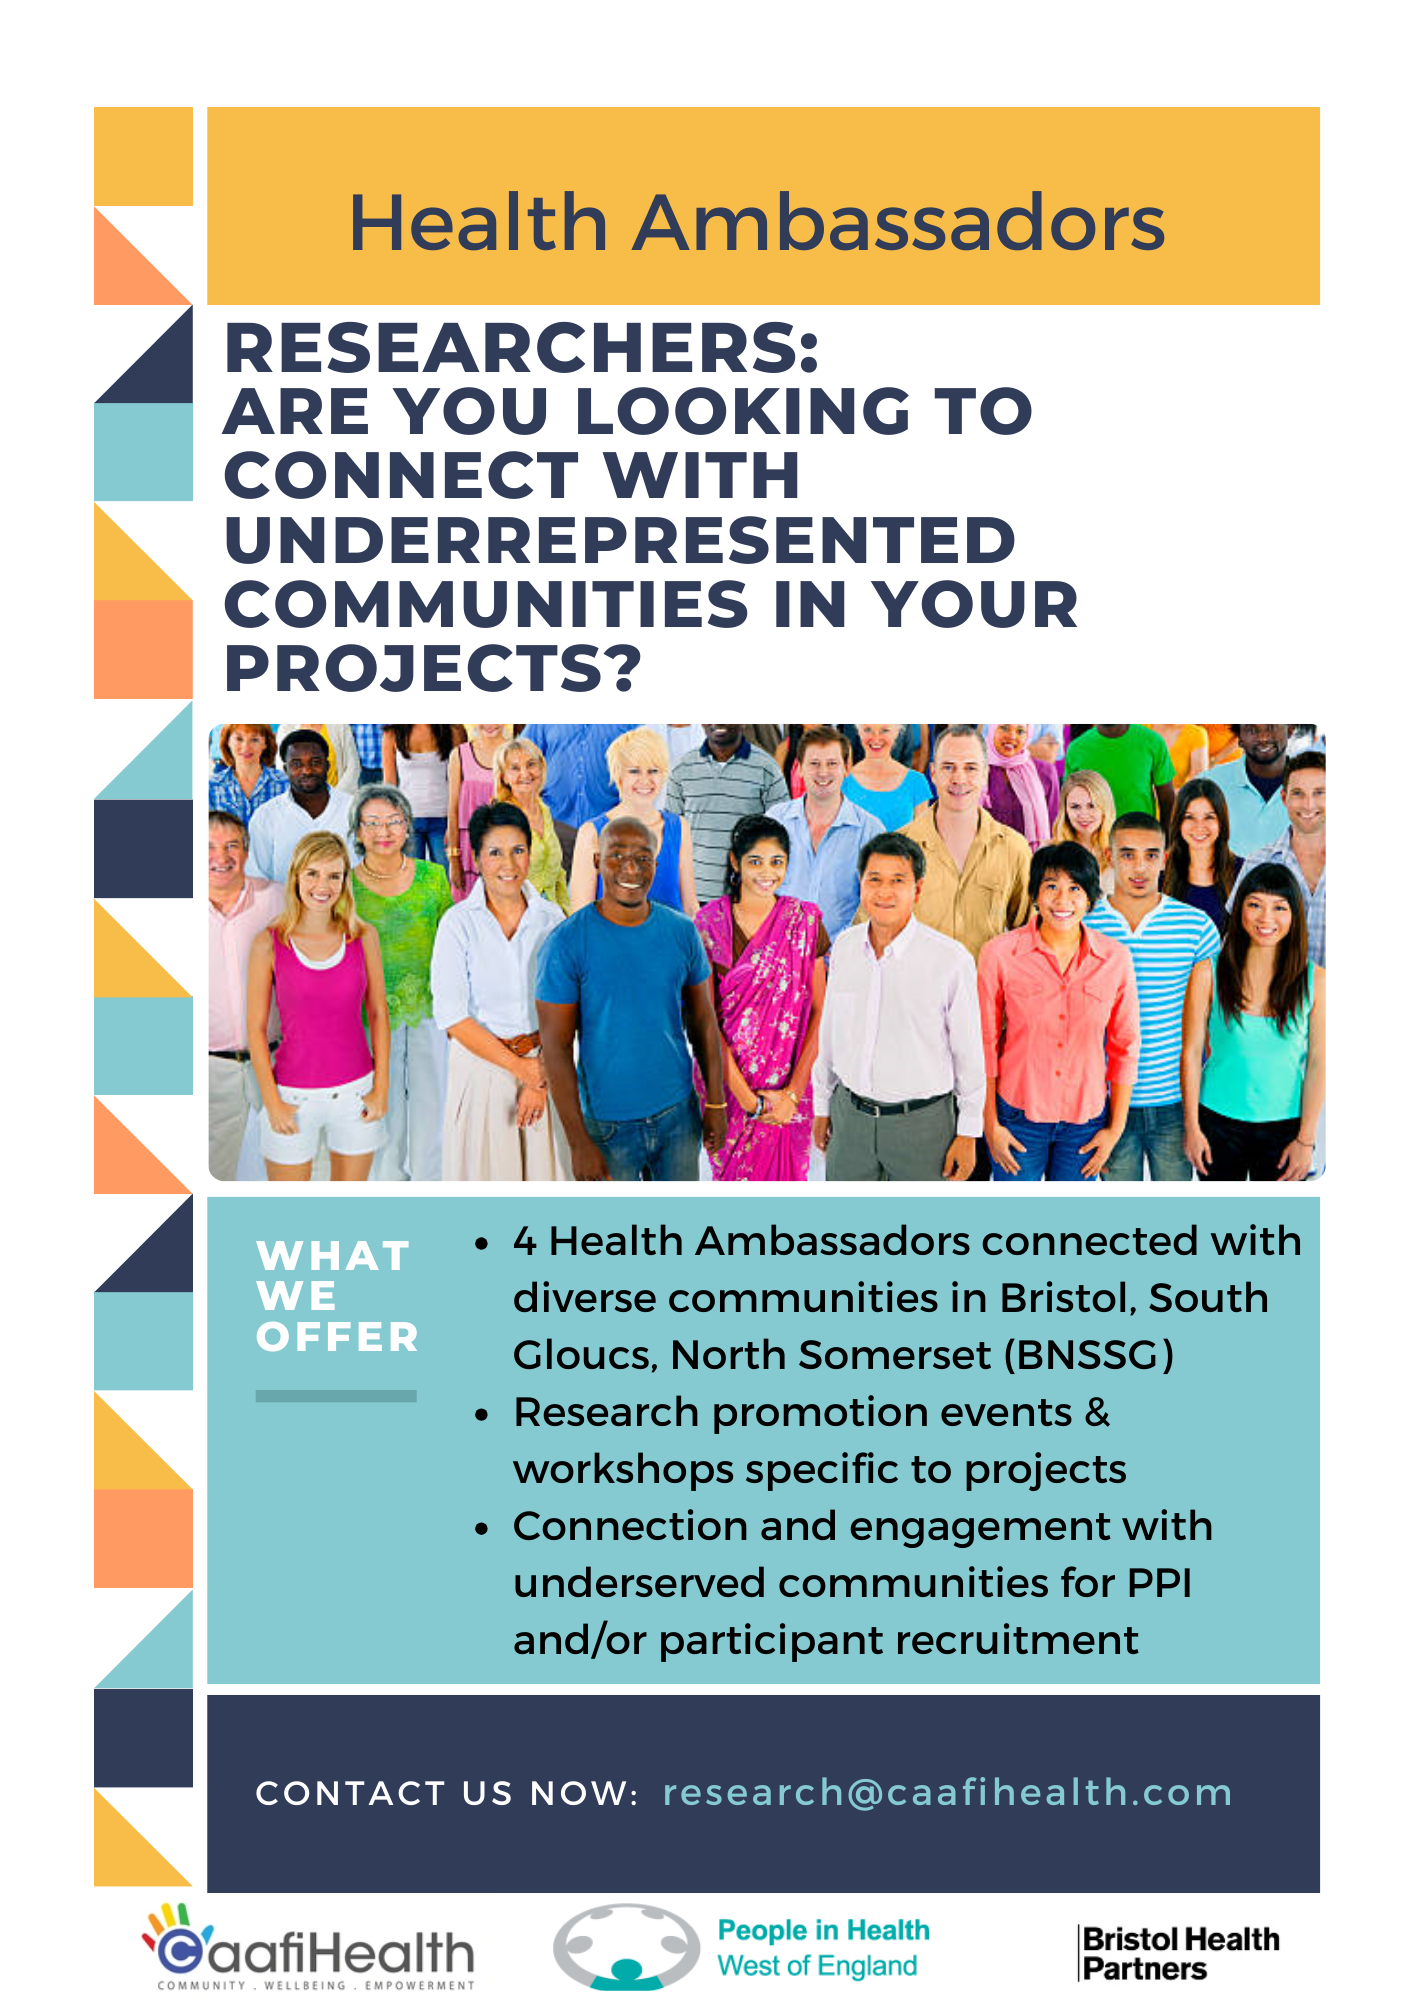 Poster advertising health research ambassadors programme to researchers